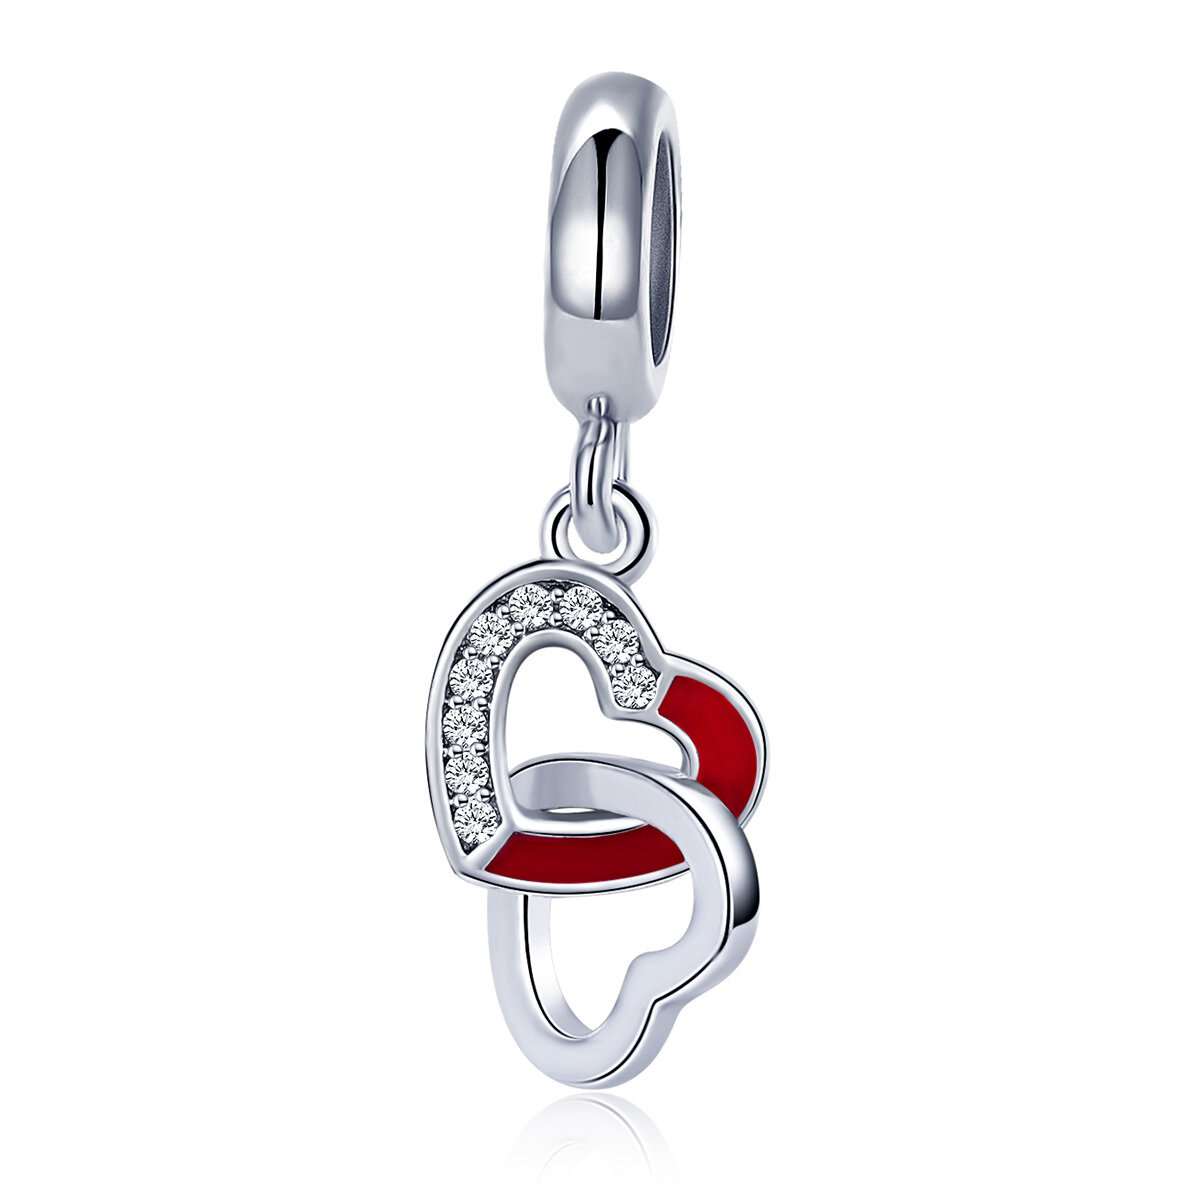 GemKing SCC735 intertwined Hearts S925 Sterling Silver Charm